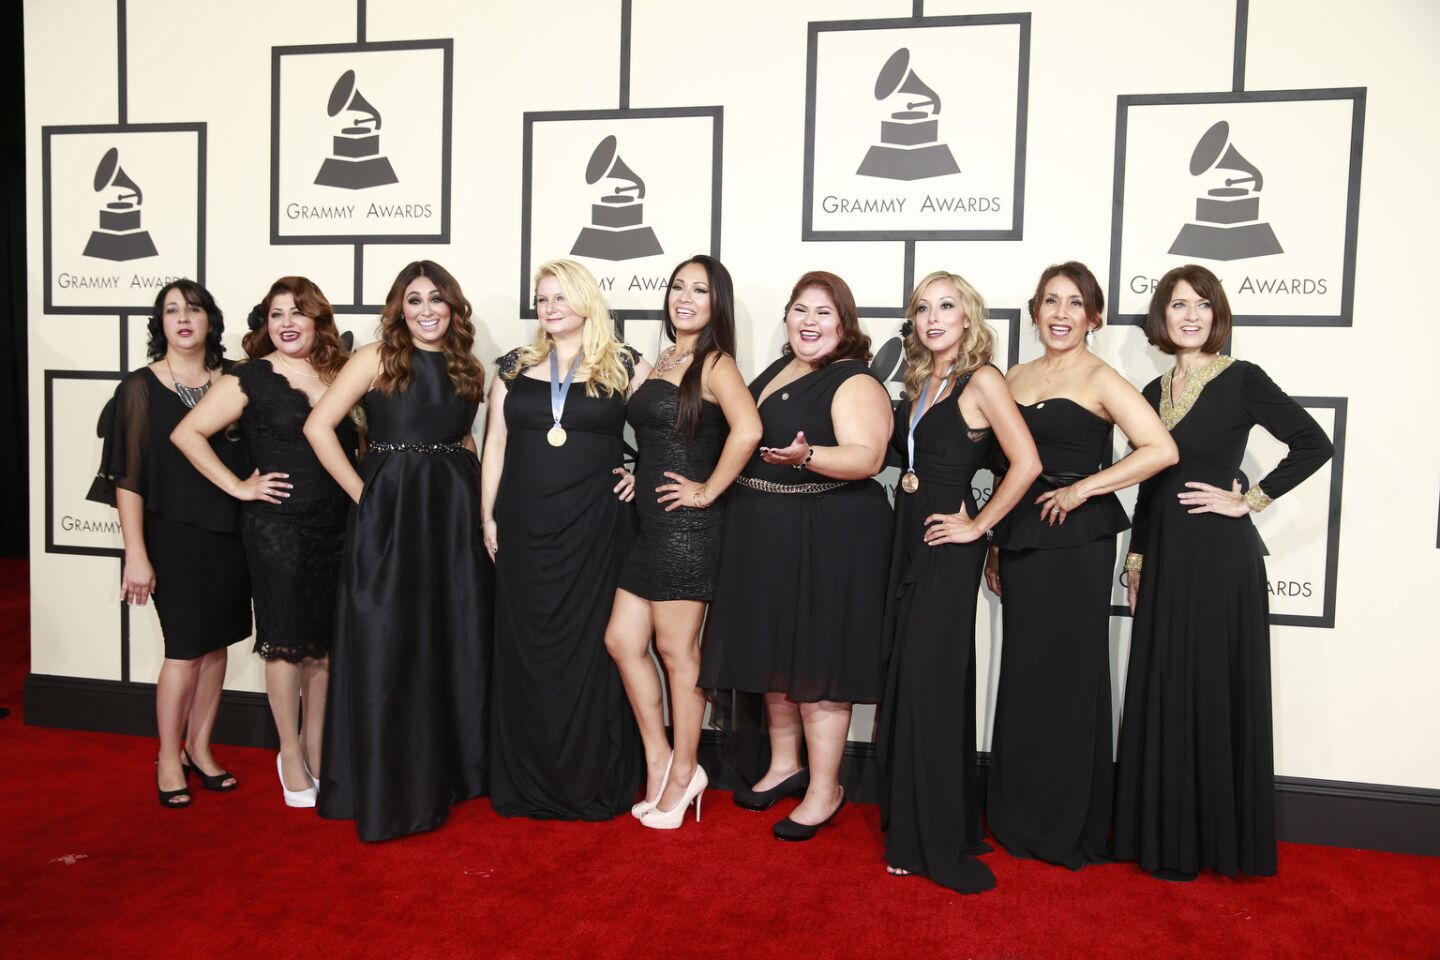 The Grammy-nominated Mariachi Divas arrive on the red carpet for the 57th Grammy Awards at Staples Center in Los Angeles.